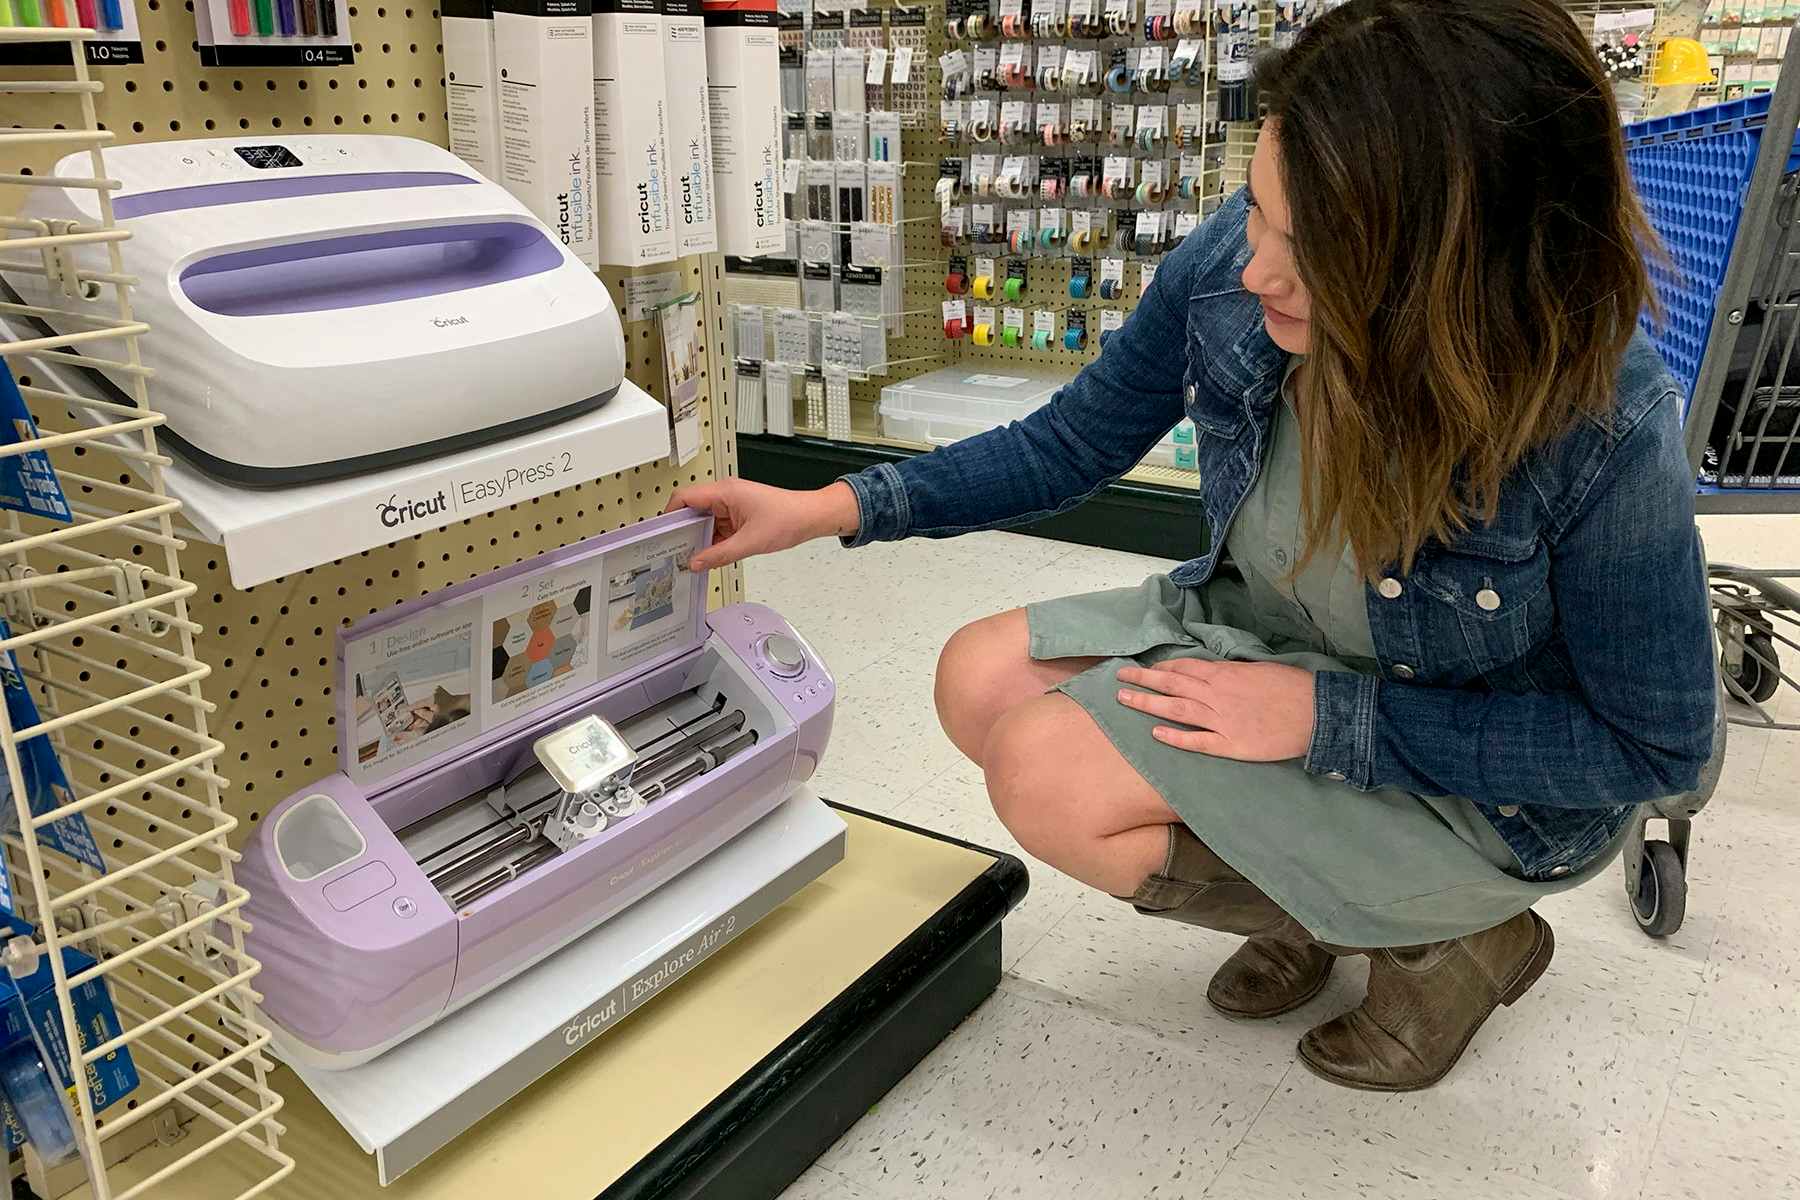 A woman looking at a Cricut Explore Air 2 on display in Hobby Lobby